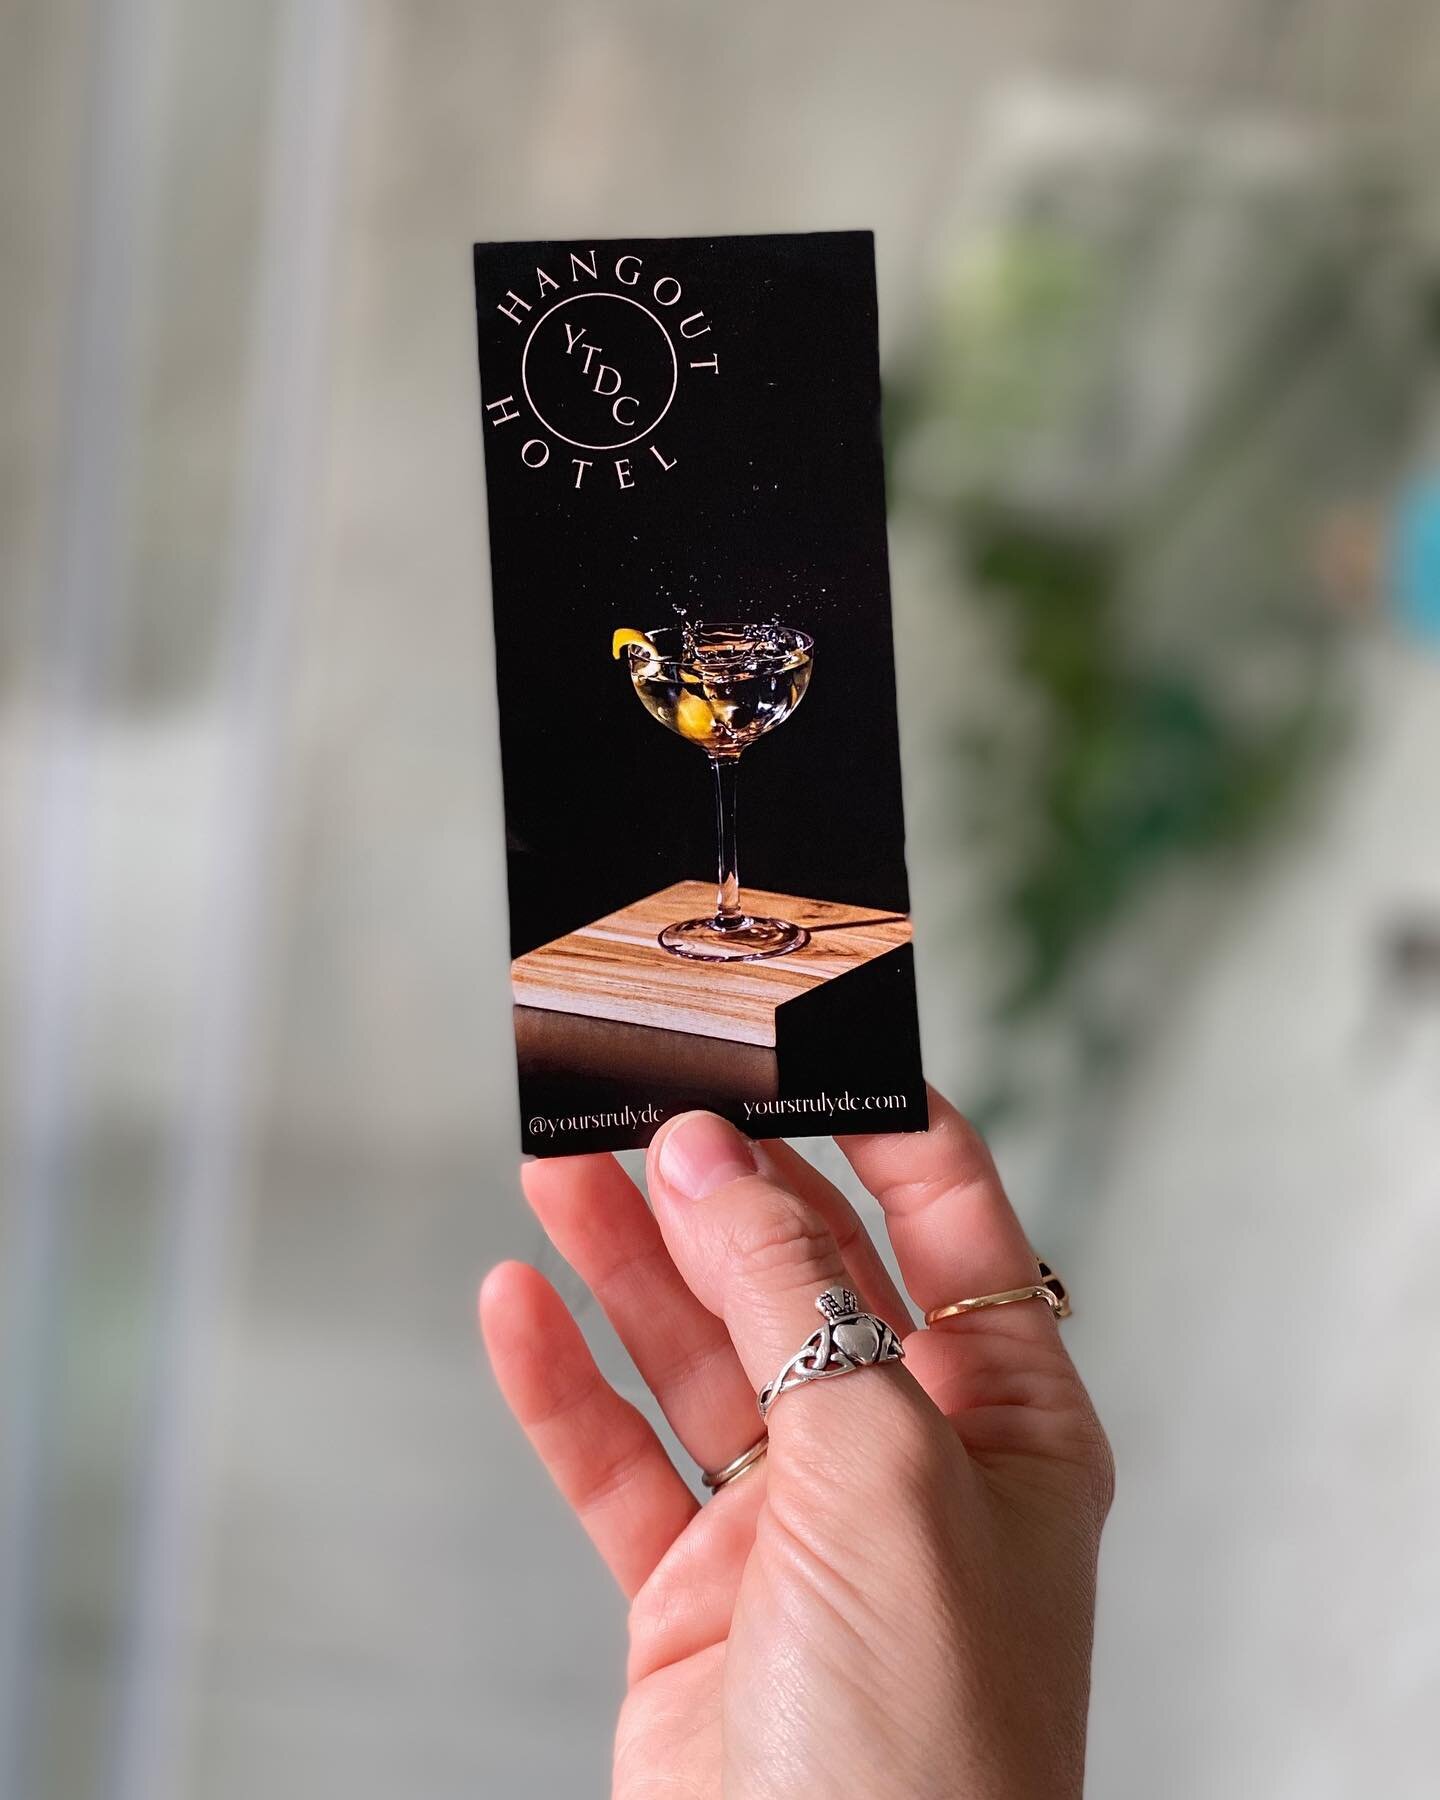 Def one of my all time faves 🍸✨
.
.
.
.
.
.
.
.
.
#ytdc #dchotel #promotional #print #layout #photooftheday #photography #freelance #graphicdesign #graphicdesigner #hireme #webdesign #rvadesigner #chic #minimalist #aesthetic #classy #liwdesigns #rva